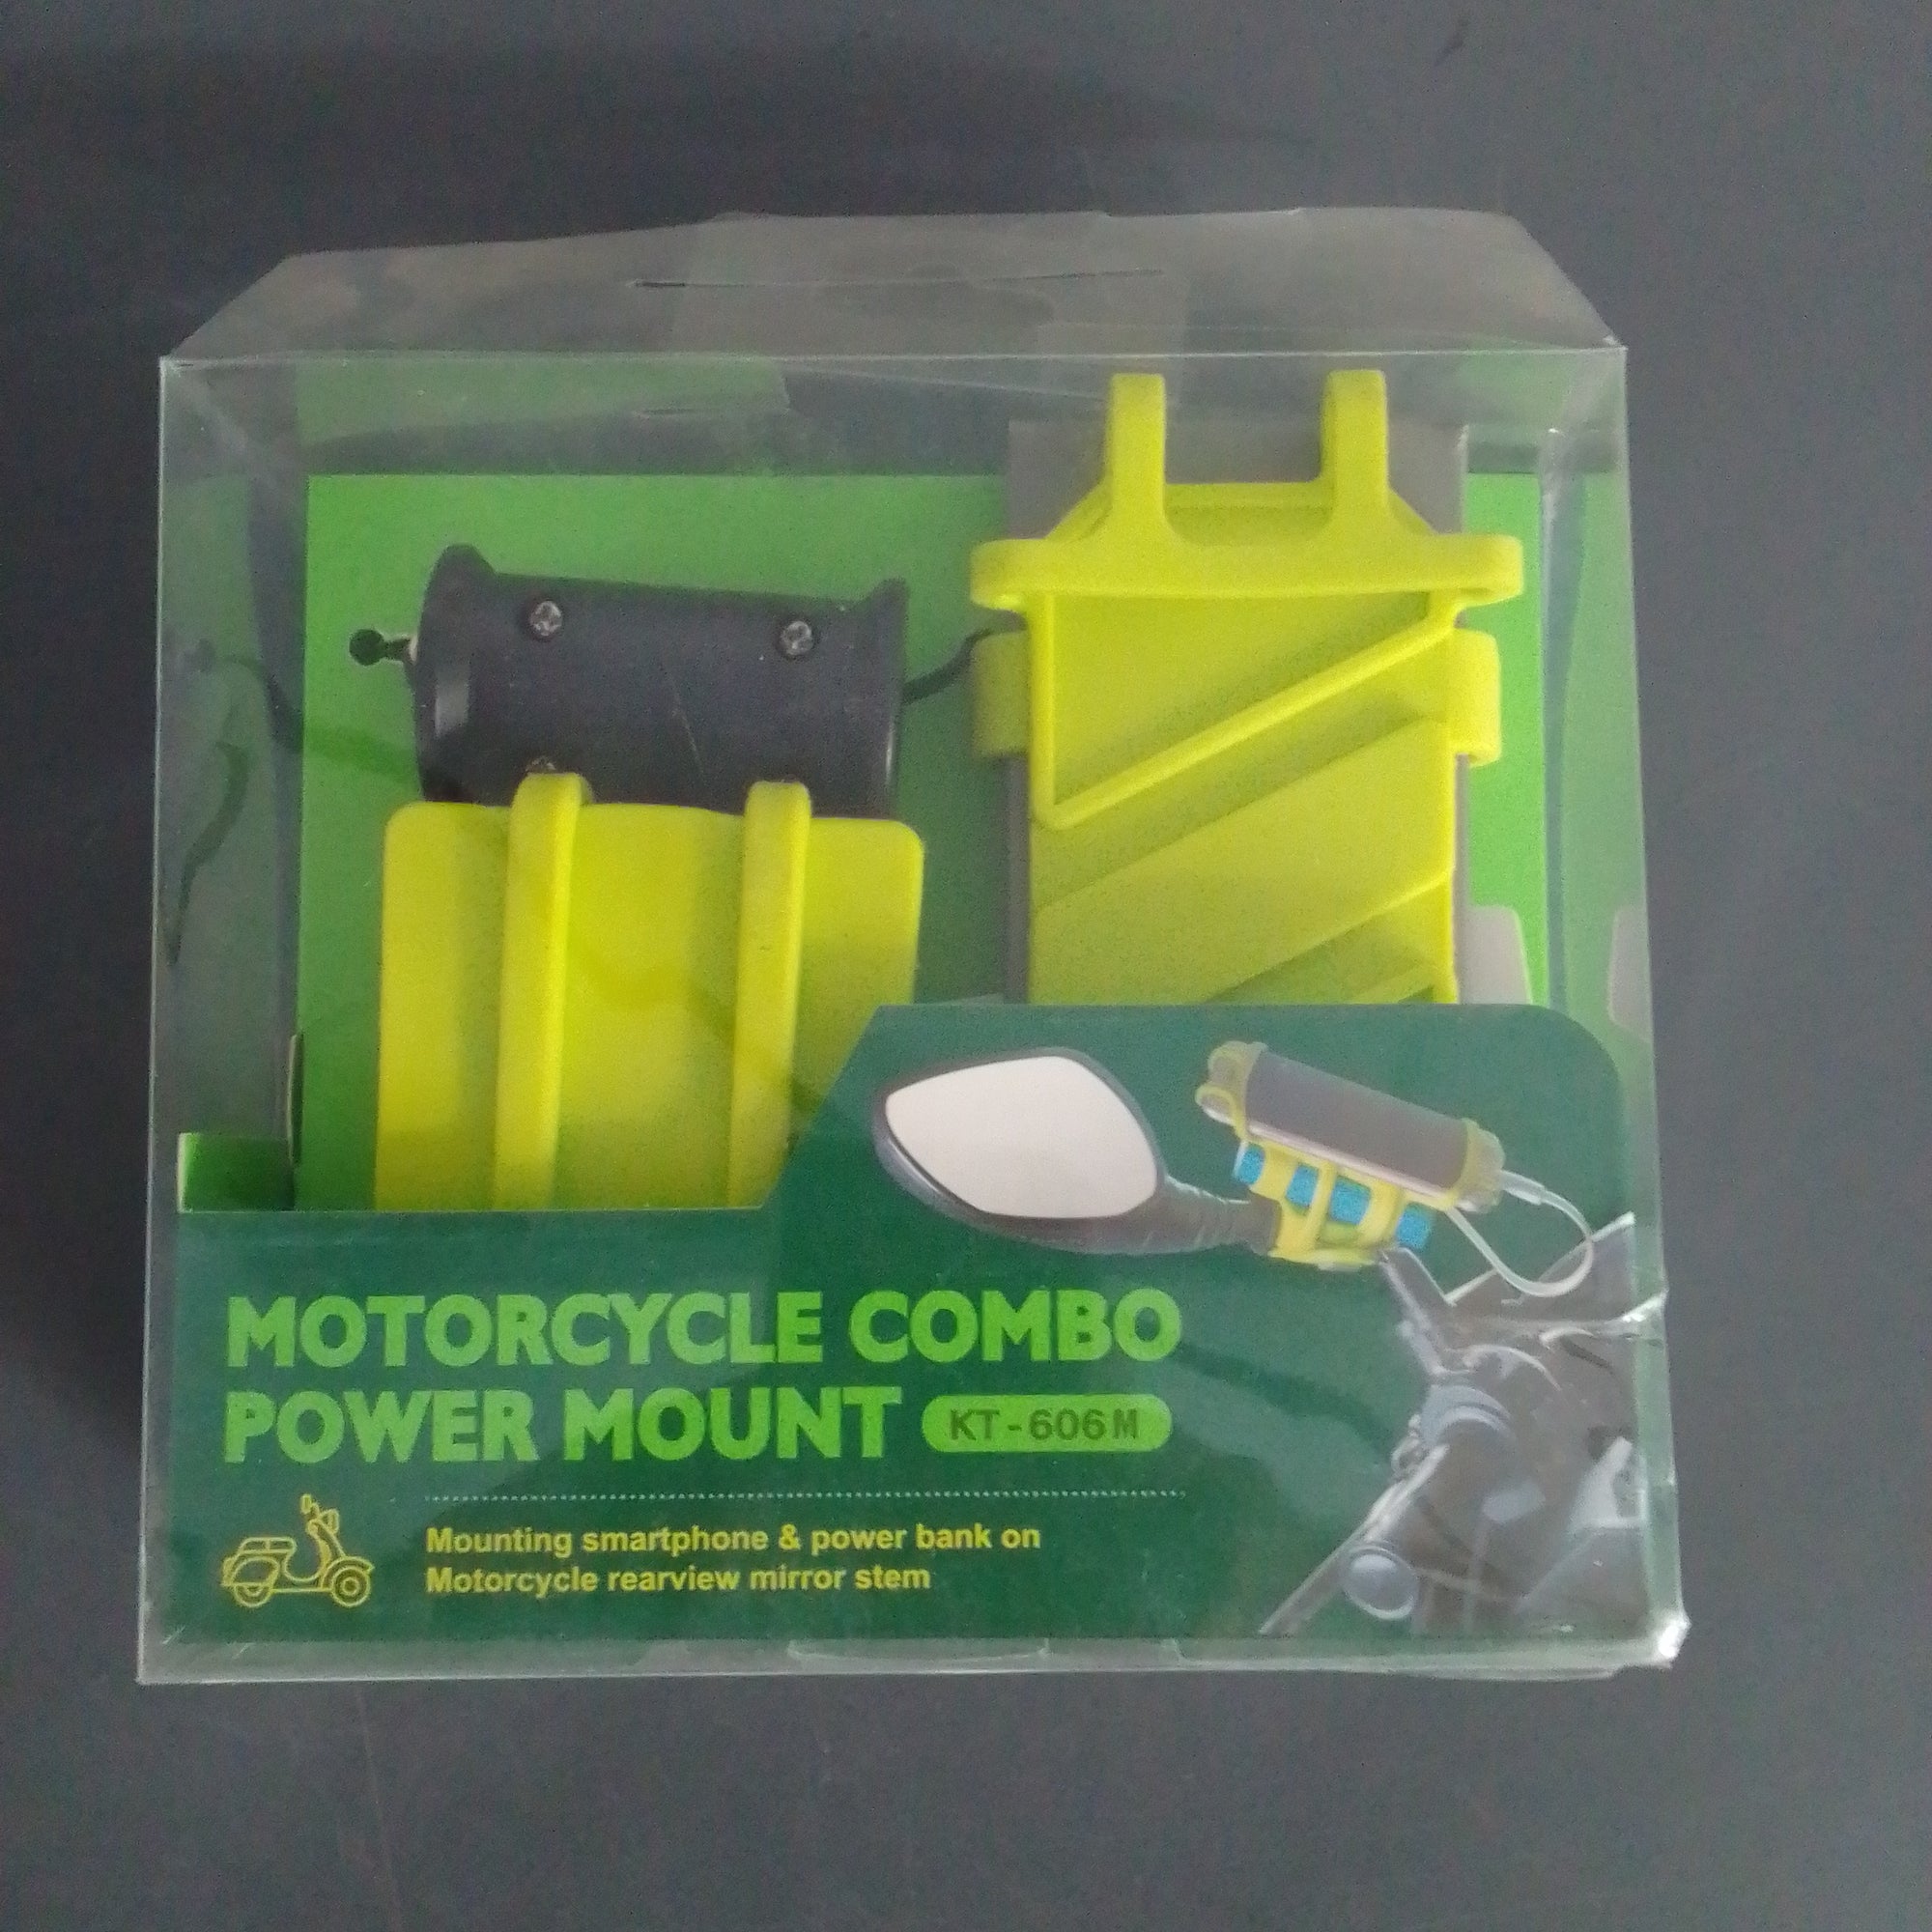 Motorcycle phone holder and charger.